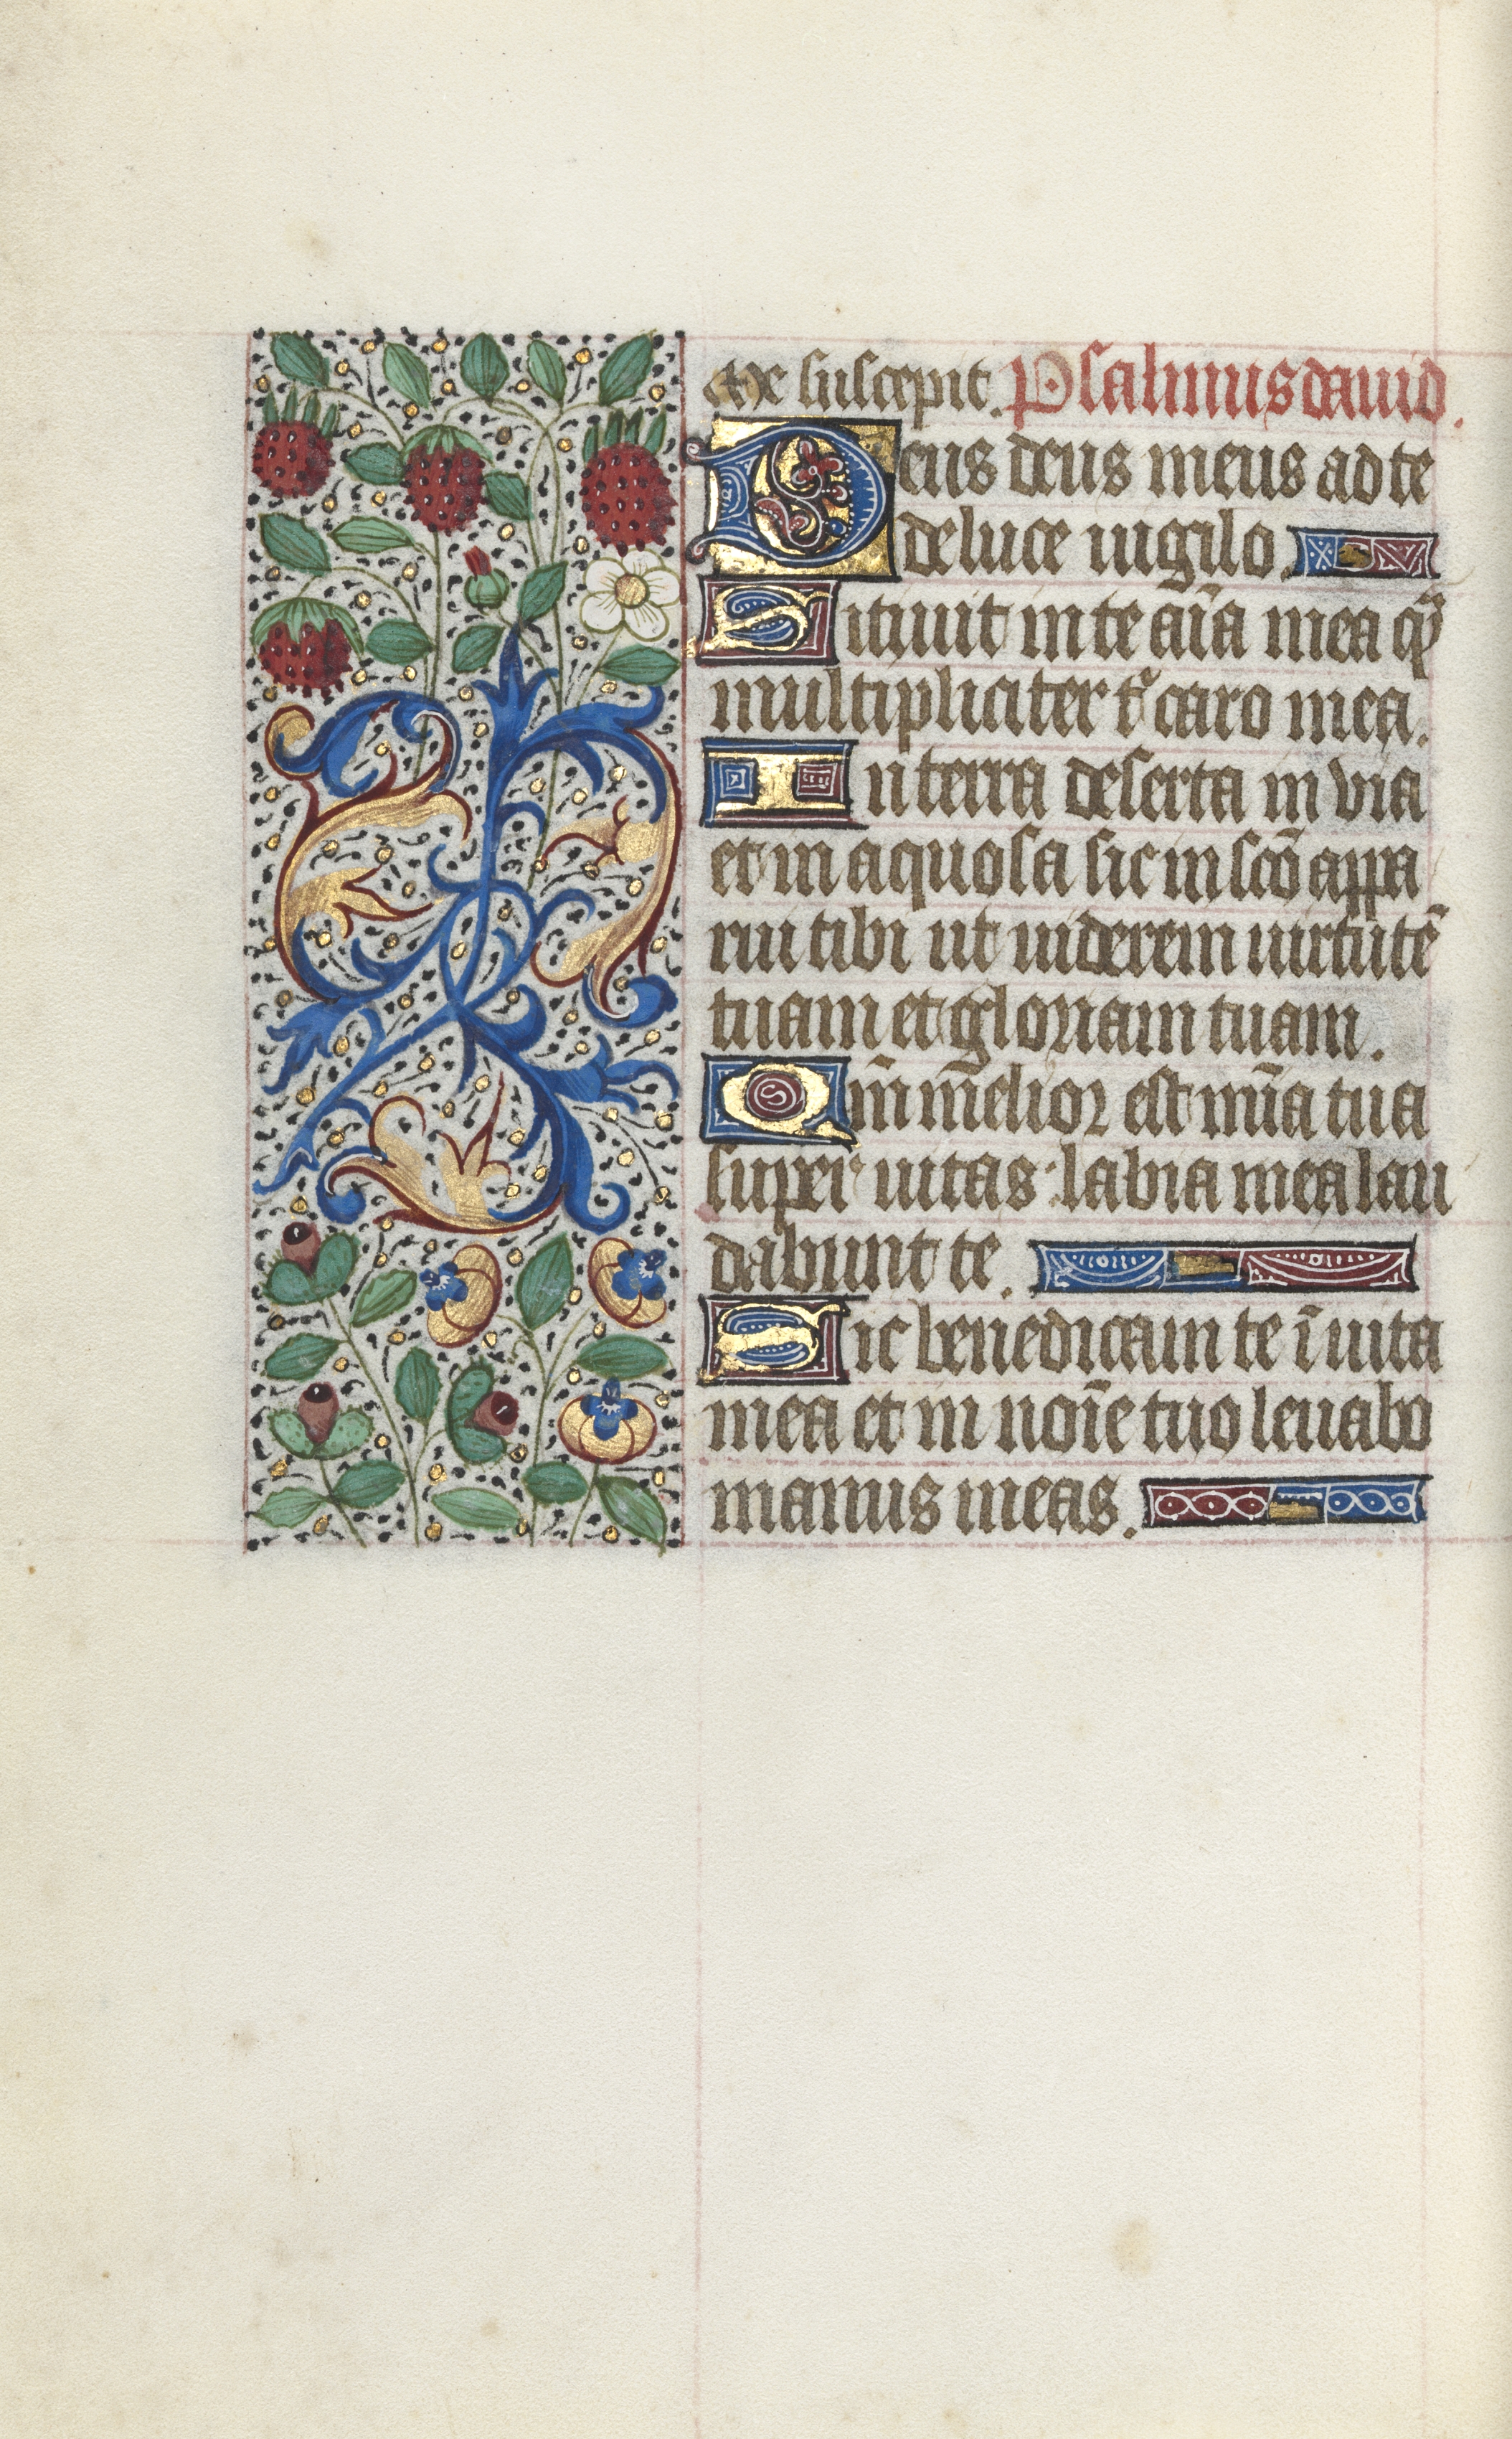 Book of Hours (Use of Rouen): fol. 137v